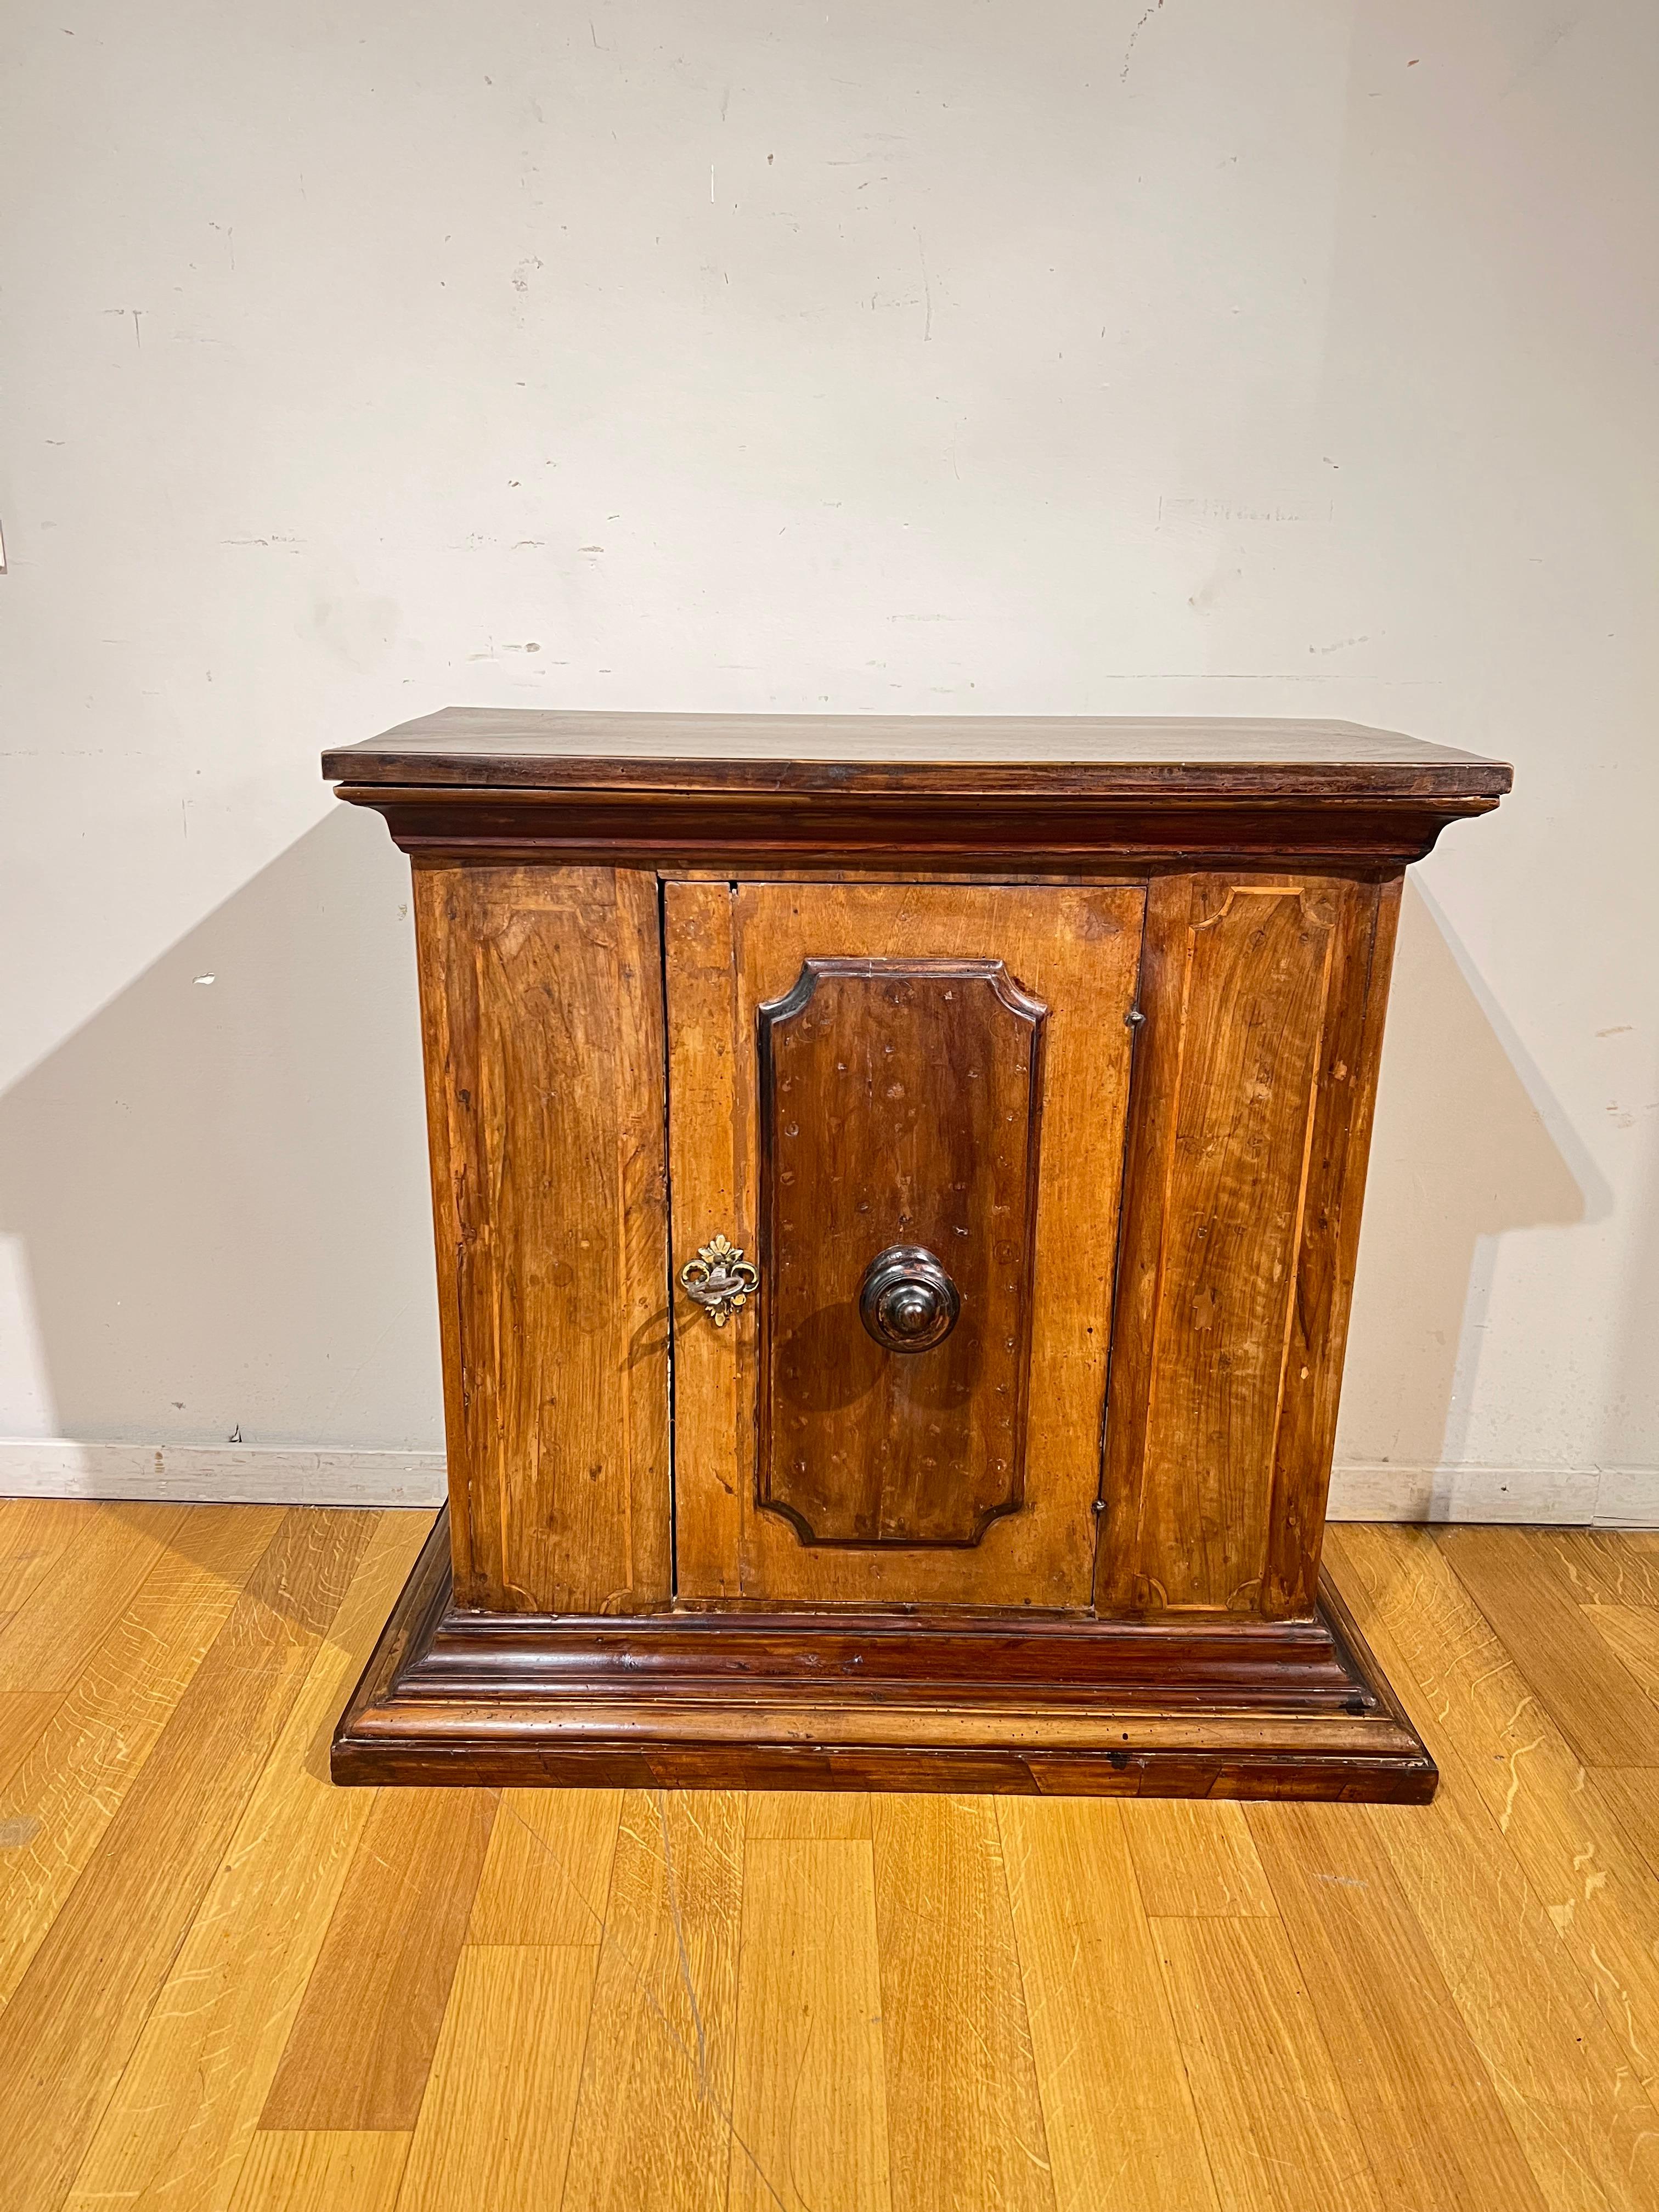 Beautiful small size sideboard in walnut embellished with fruit wood threads. An ashlar door on the front with a turned wooden knob, a gilt bronze escutcheon and an iron key.
Tuscan manufacture from the end of the 1600s.

MEASURES: cm 76x81x38.